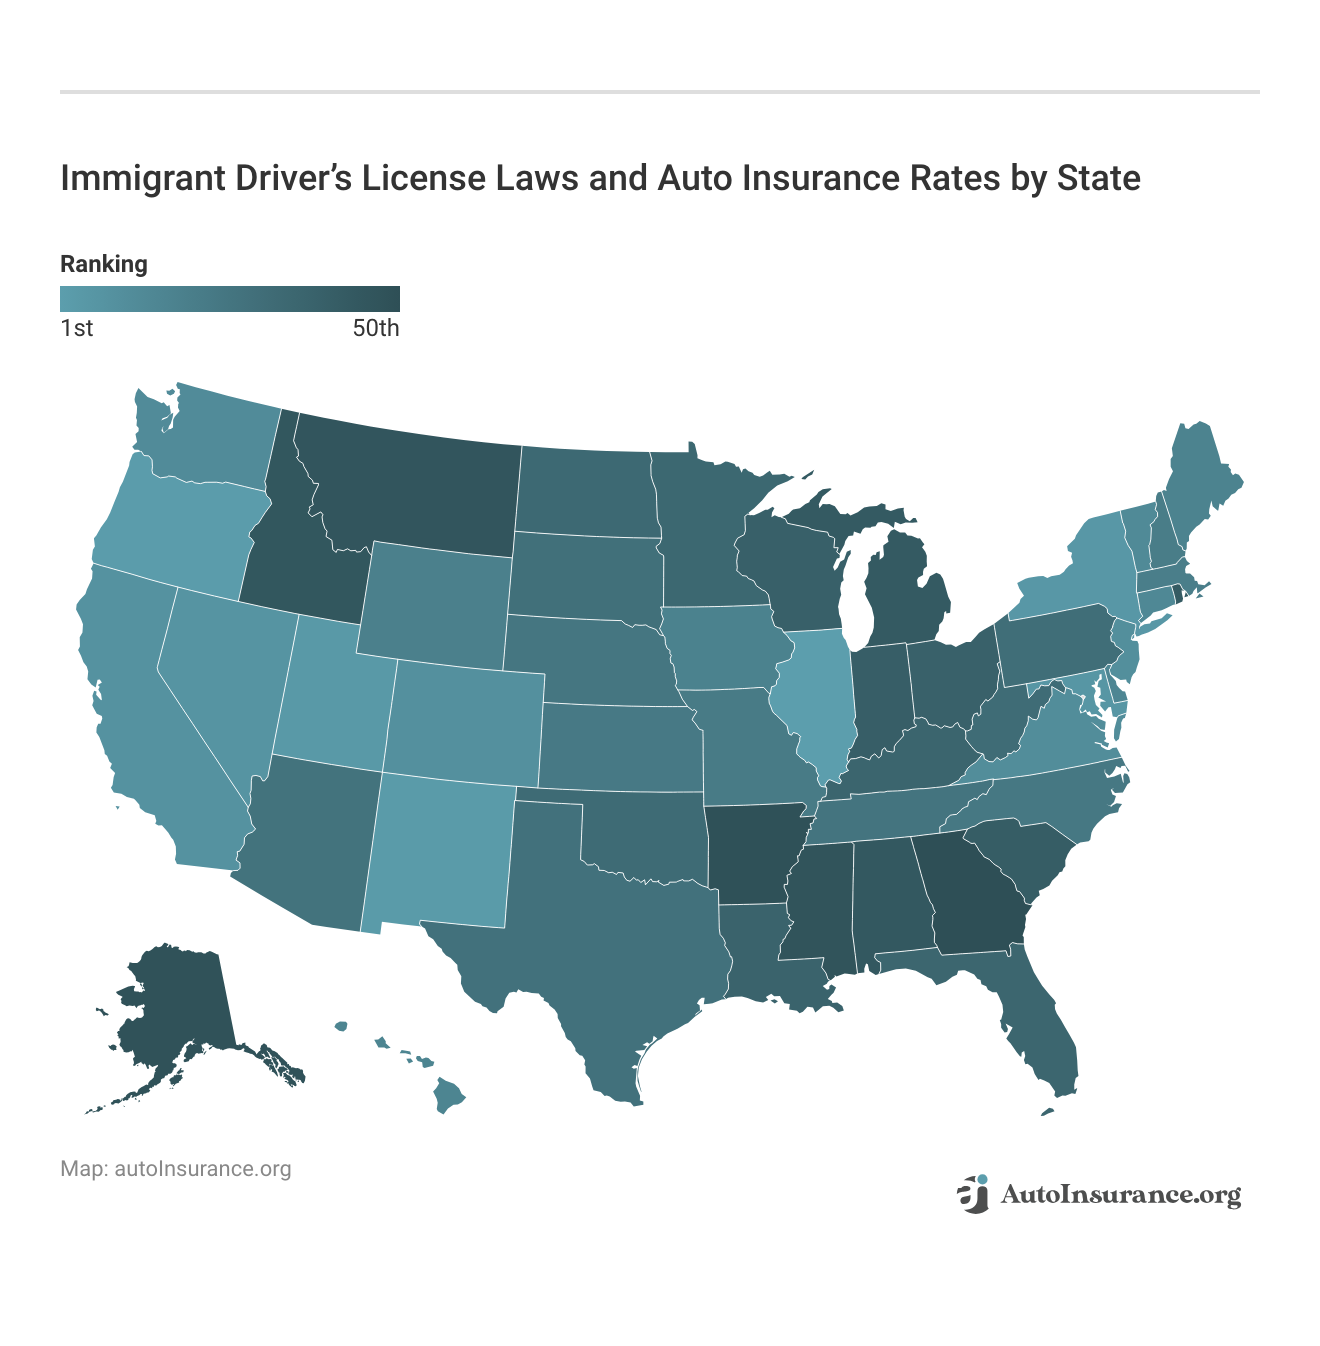 <h3>Immigrant Driver’s License Laws and Auto Insurance Rates by State</h3>